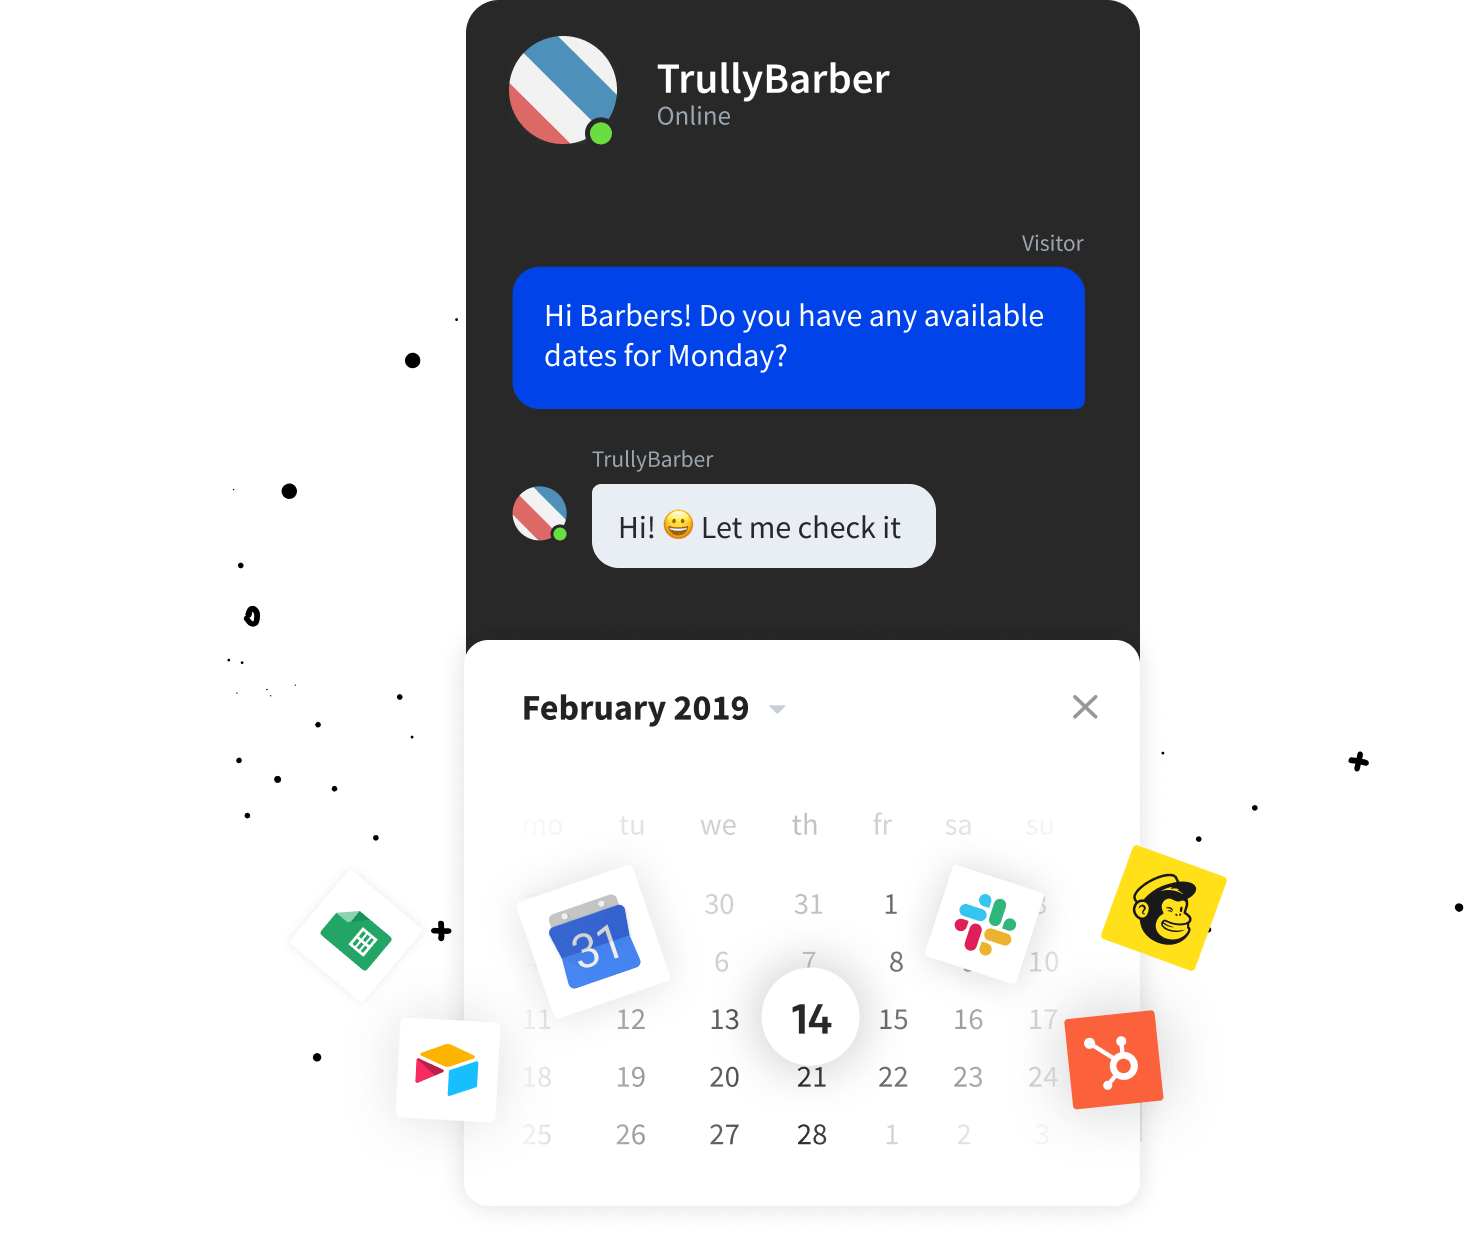 Chatbot integration with Zapier and Google Calenda